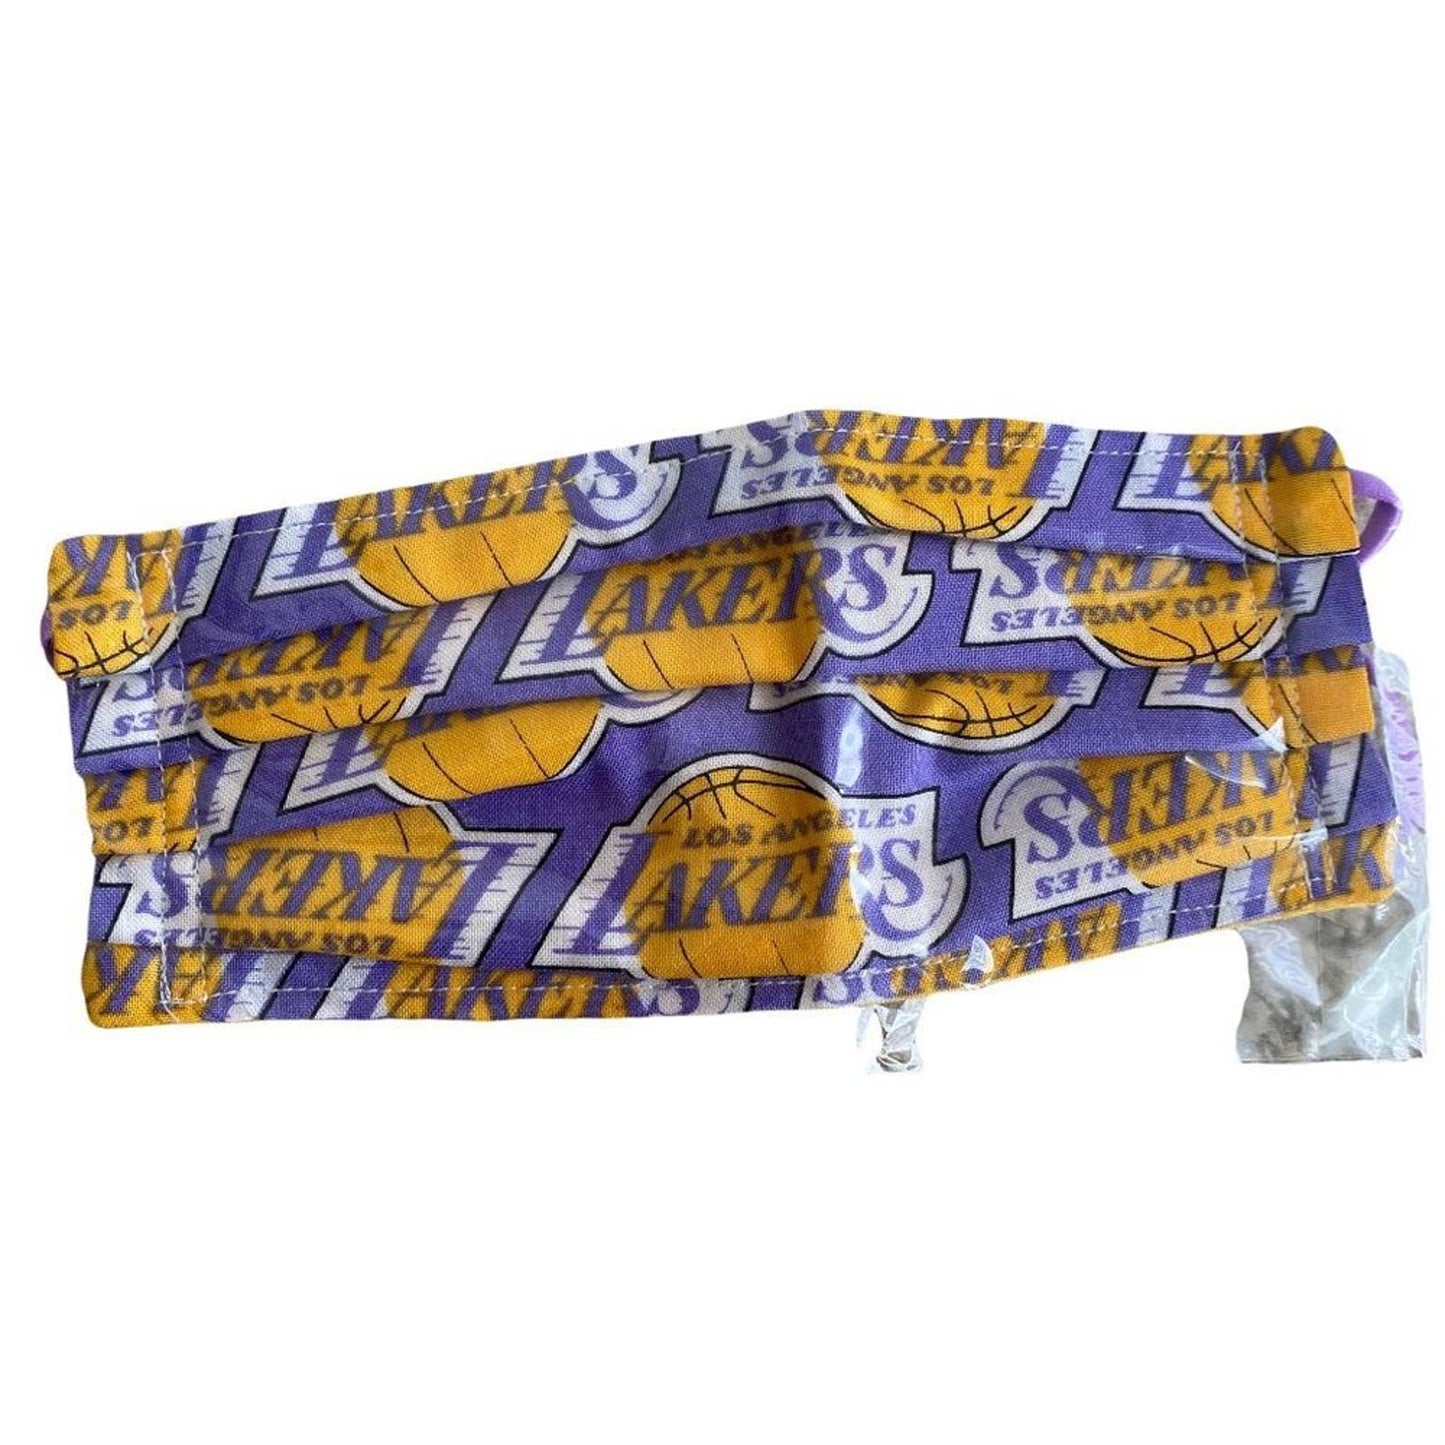 Los Angeles Lakers sz One size purple yellow team sport face mask NWT